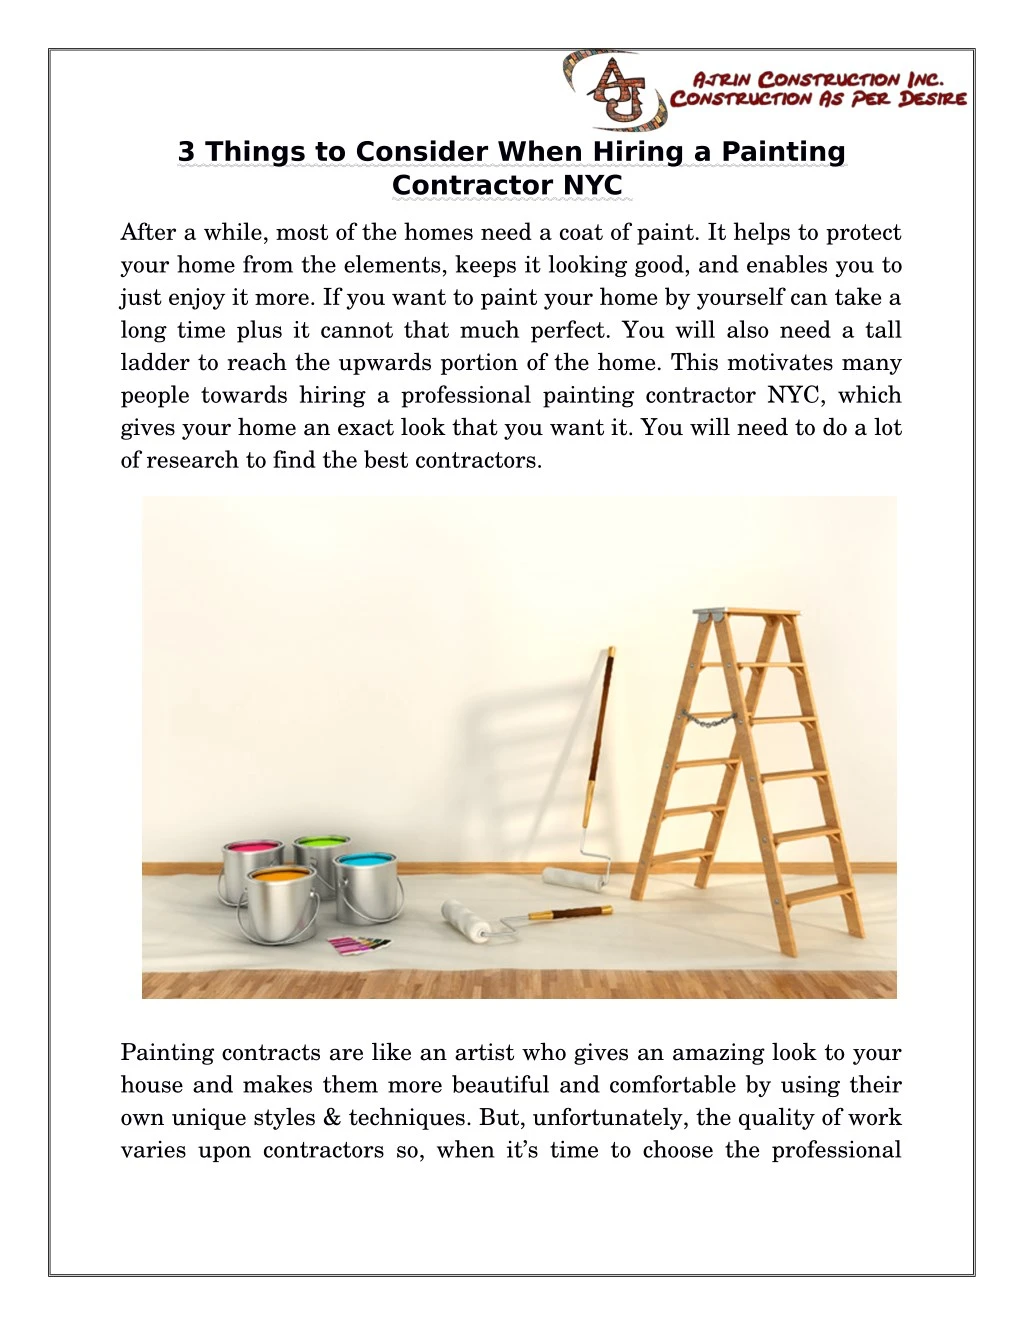 3 things to consider when hiring a painting